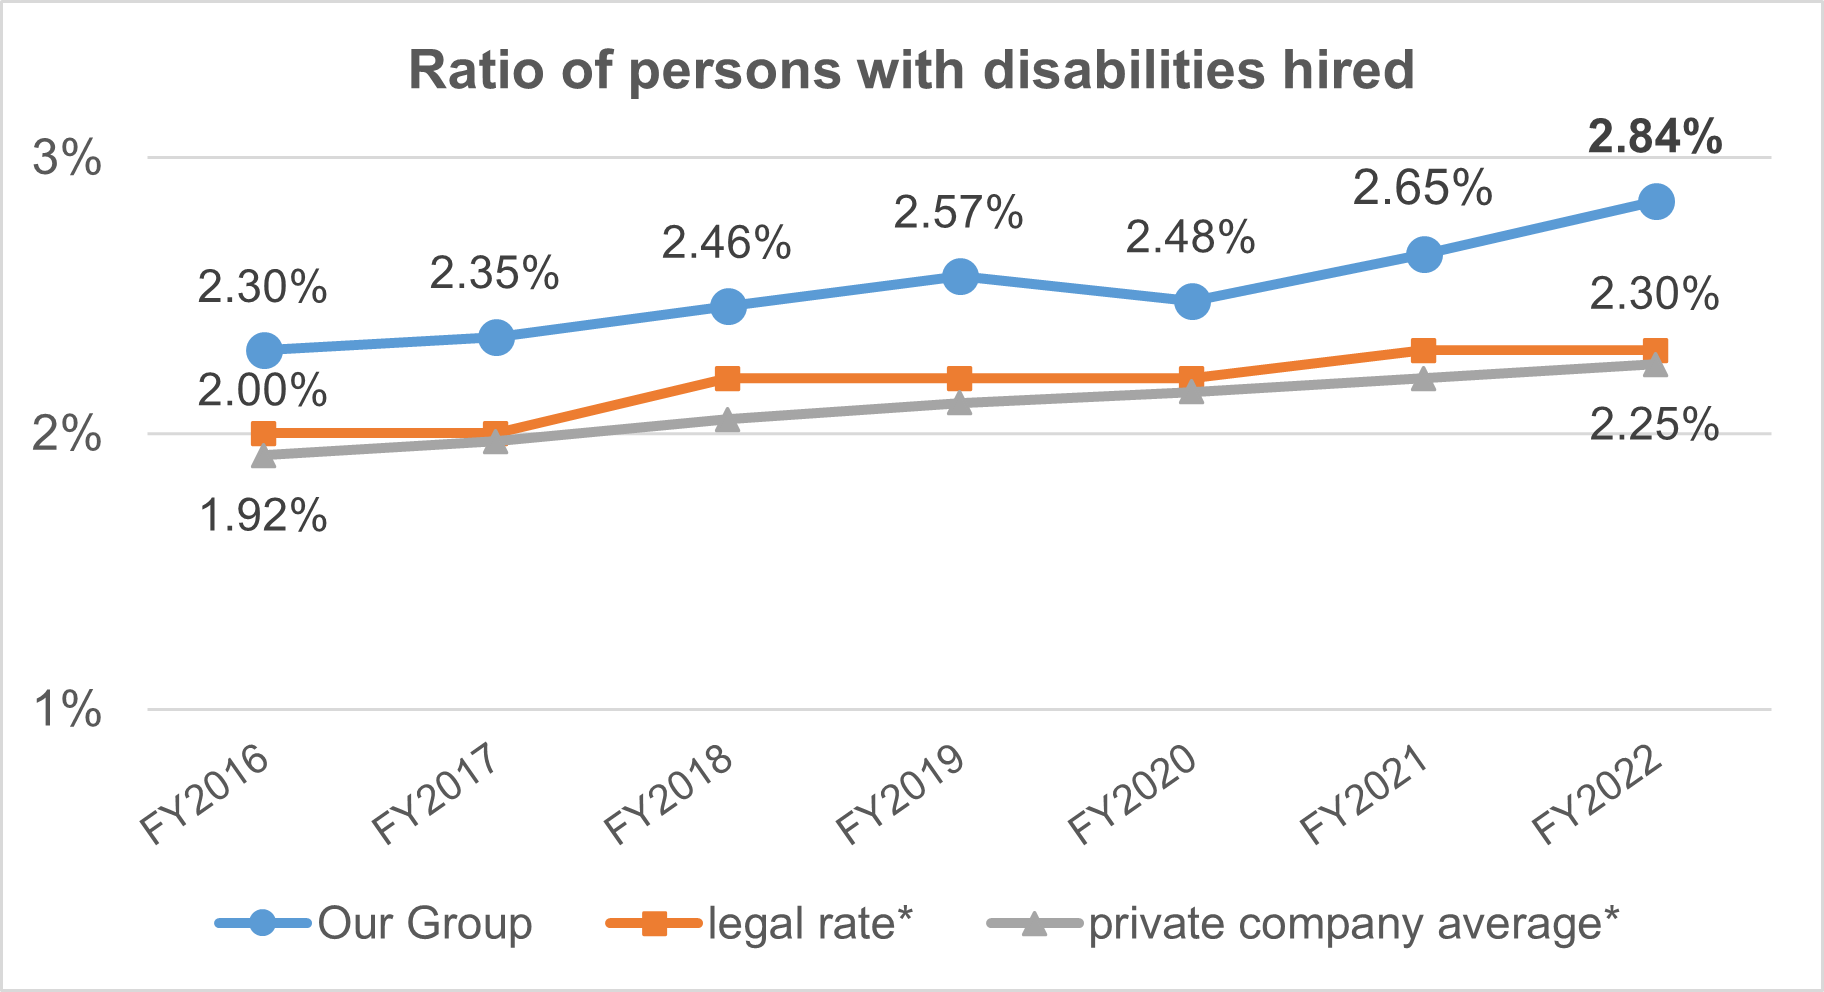 Ratio of persons with disabilities hired